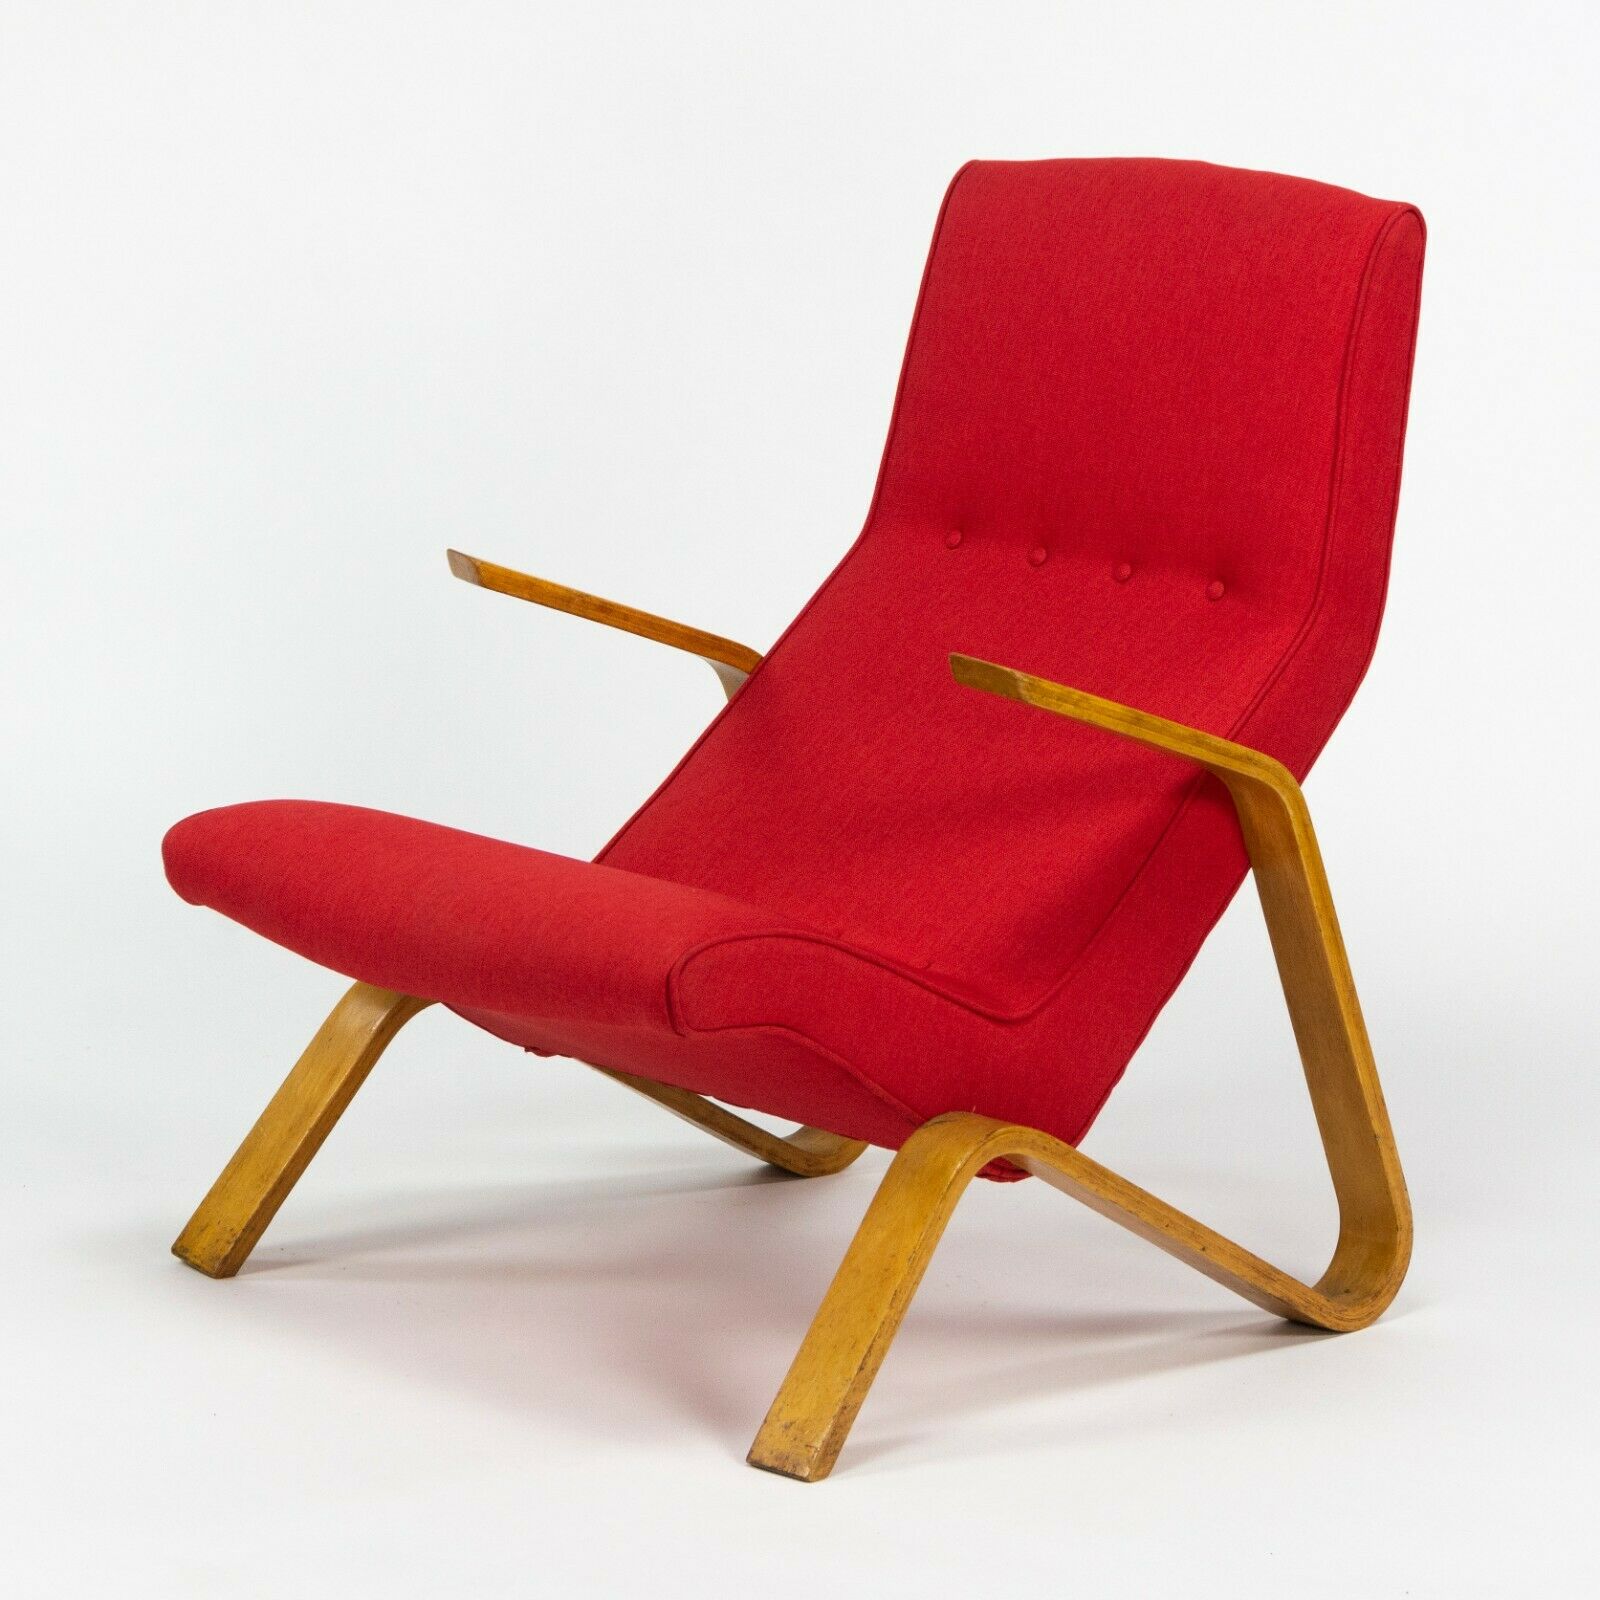 SOLD 1950s Eero Saarinen Knoll Grasshopper Lounge Chair w/ New Red Knoll Upholstery